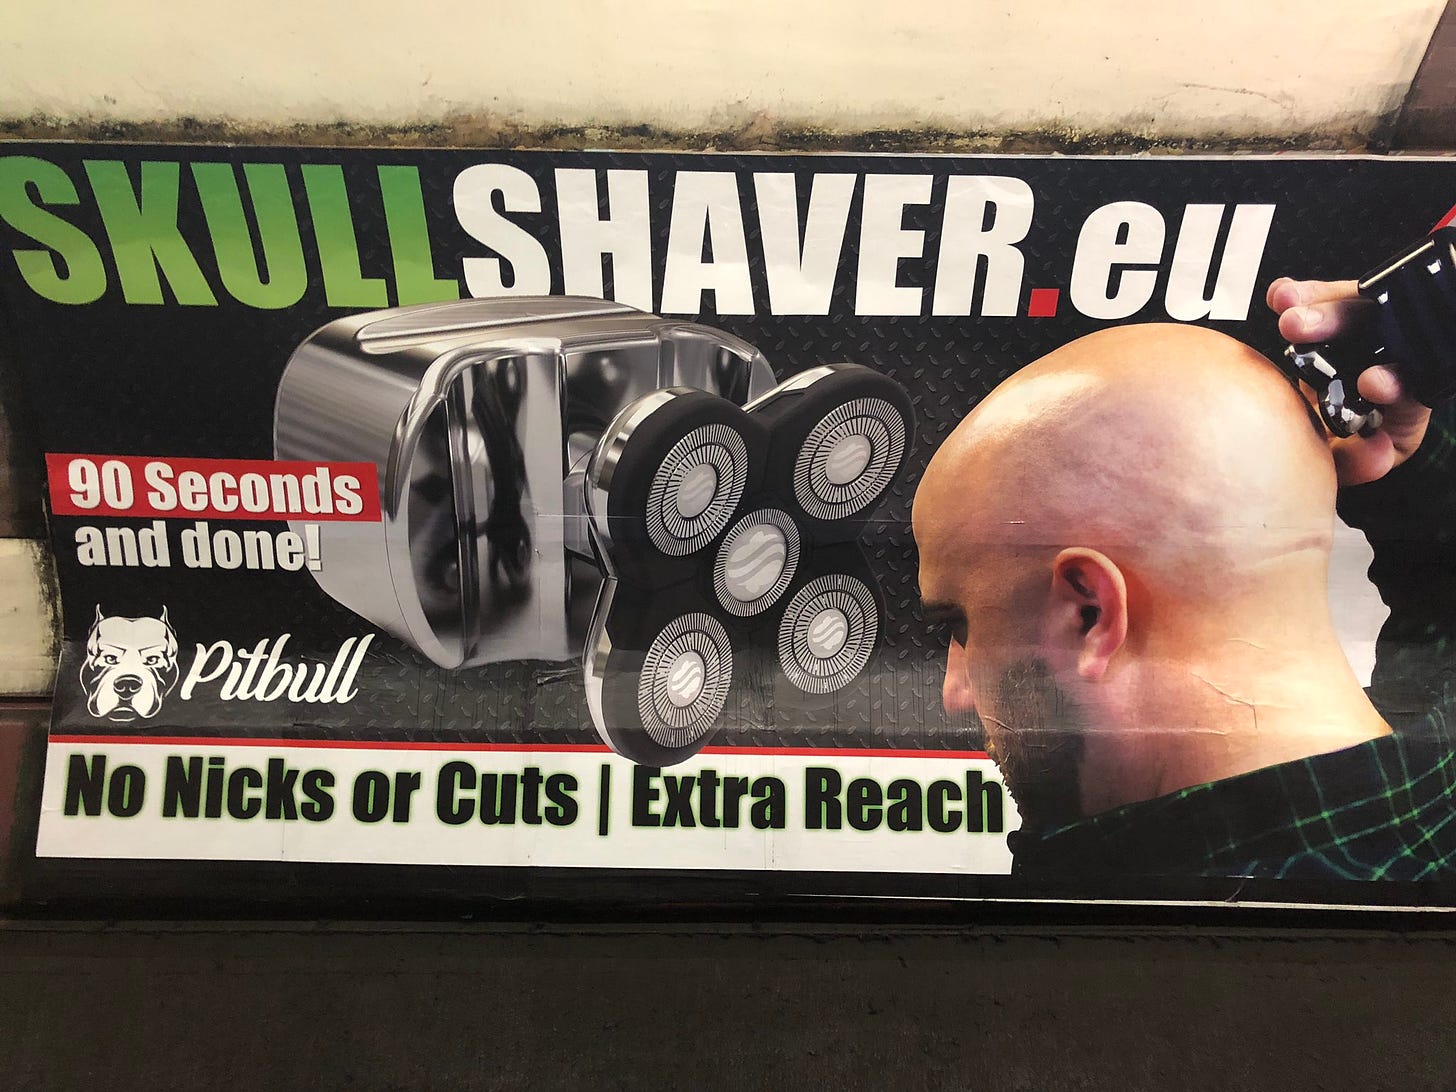 Tom Calver on X: "Not sure about the new skull shaver ad - lacks some of  the 'year 5 school project power point' charm of the original  https://t.co/aP8Qa310Tx" / X